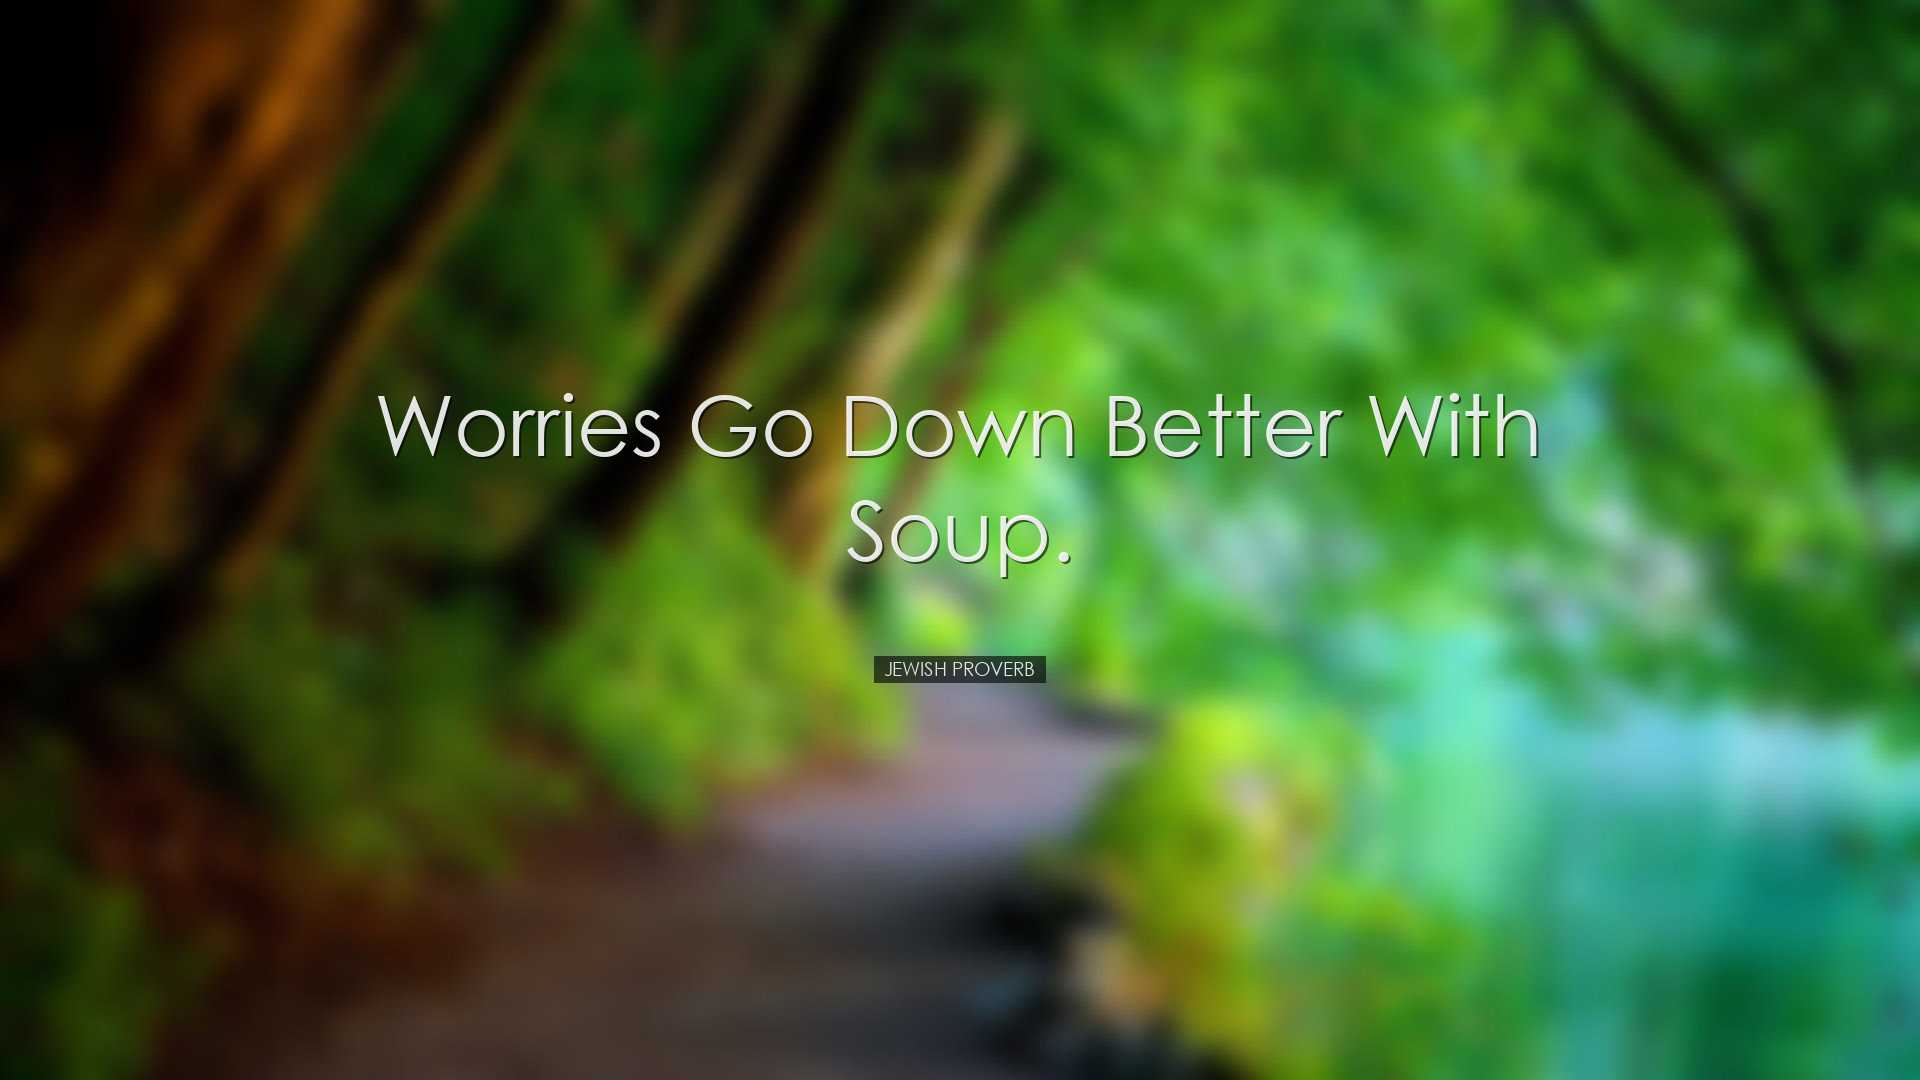 Worries go down better with soup. - Jewish Proverb